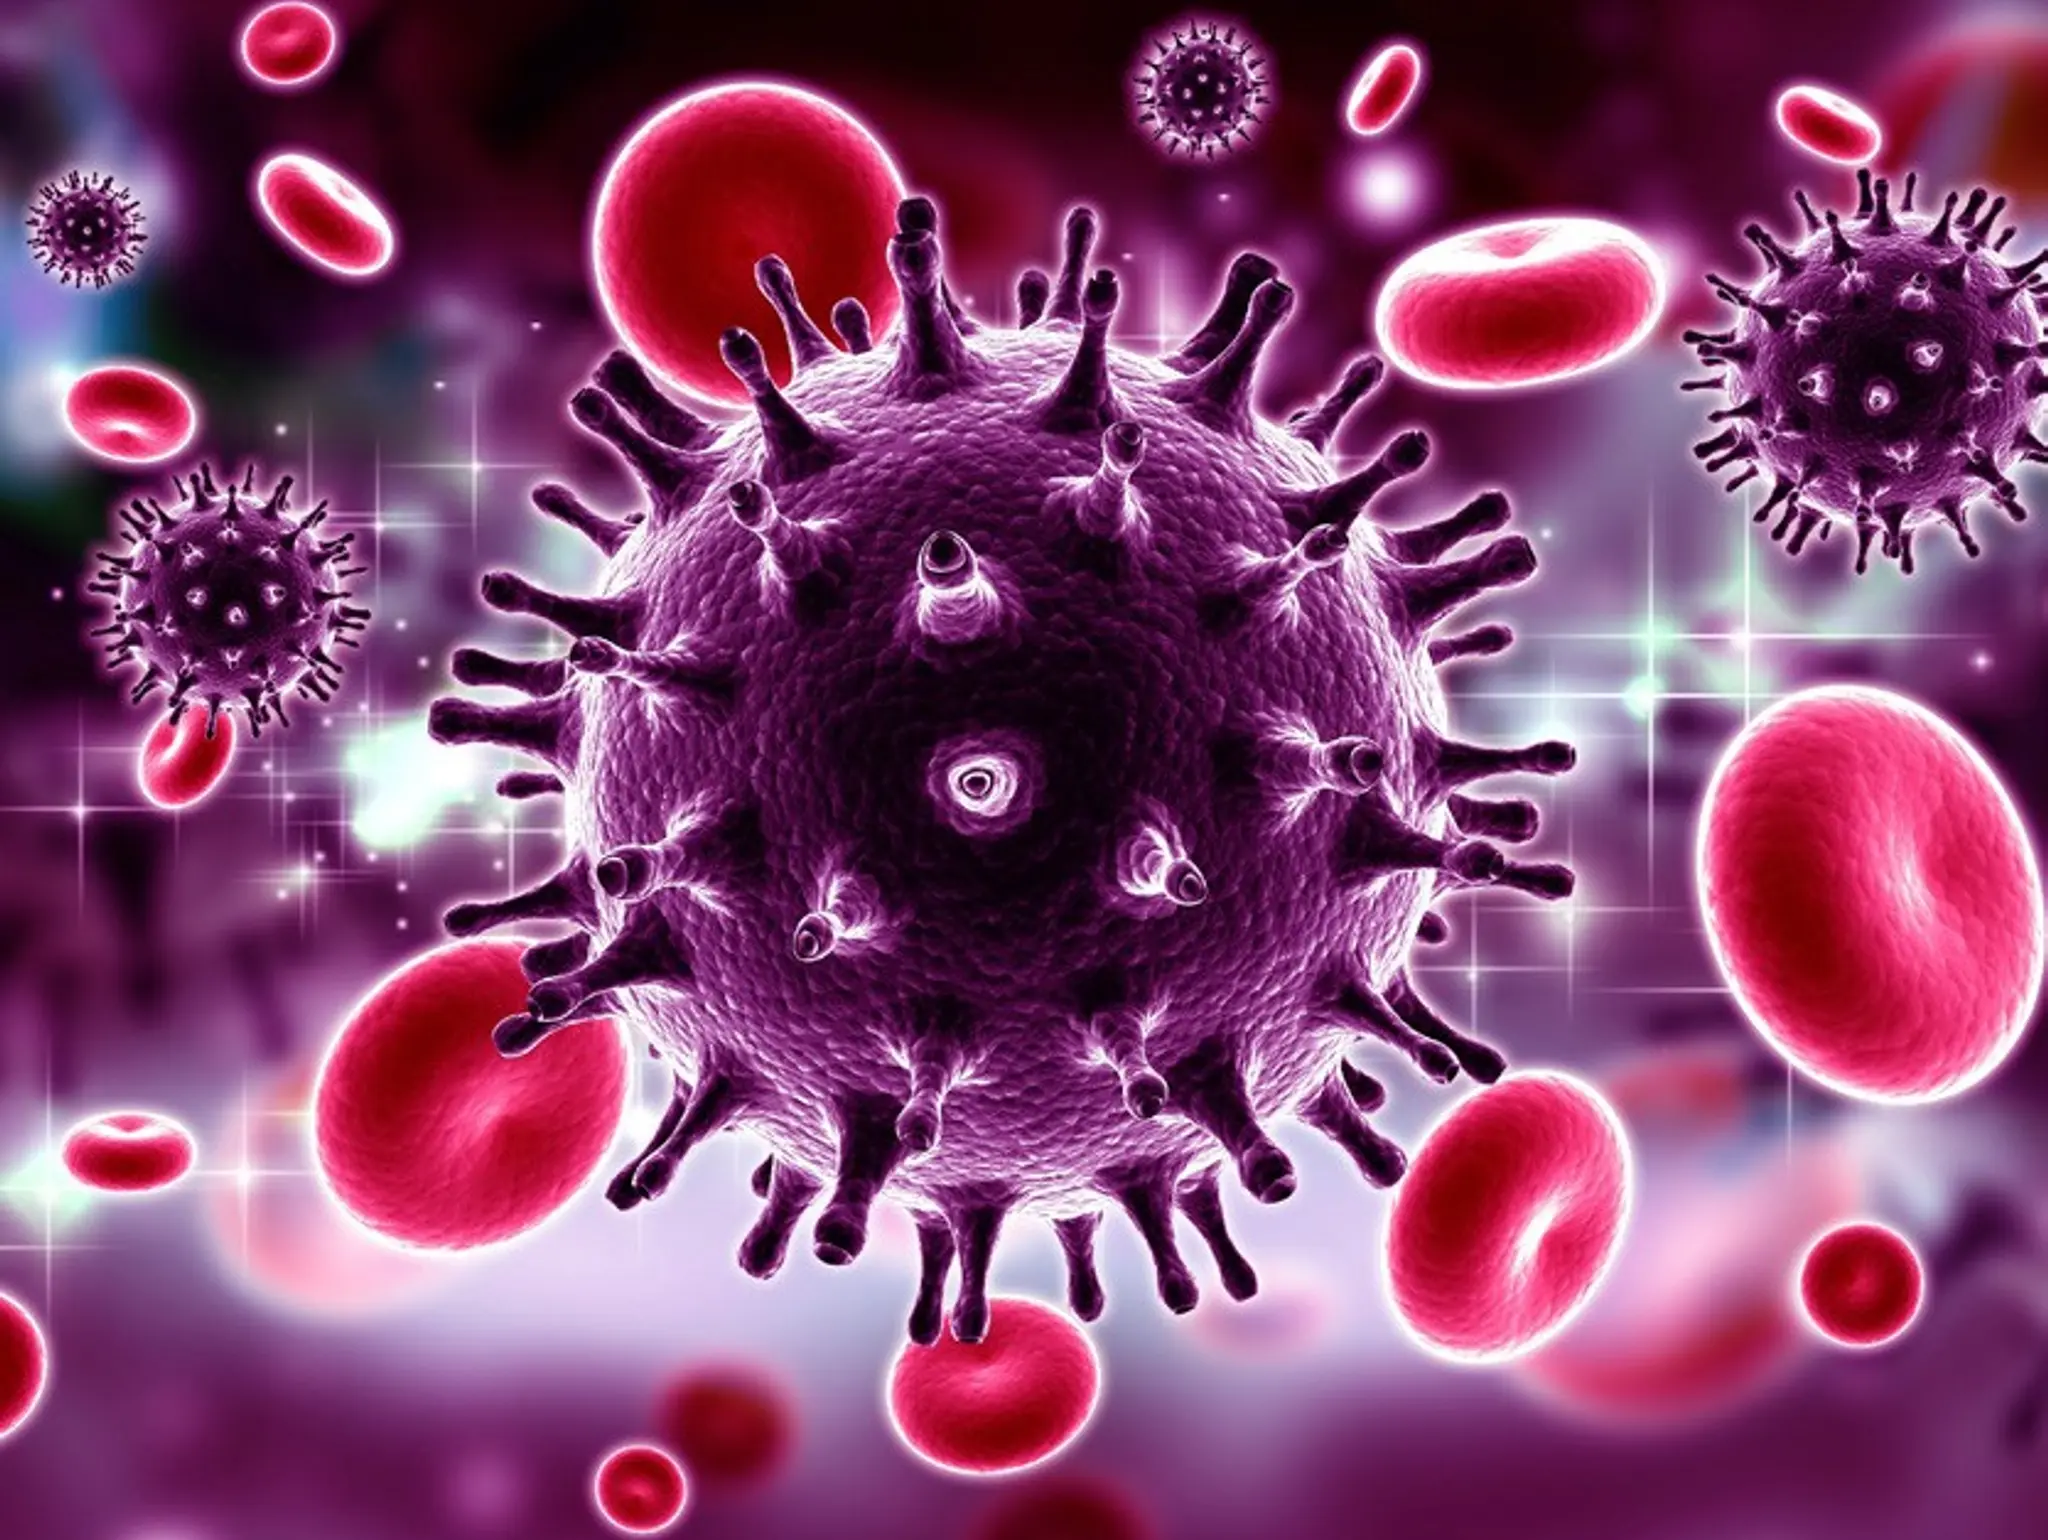 Gilead and Merck share new data from phase 2 HIV treatment trial